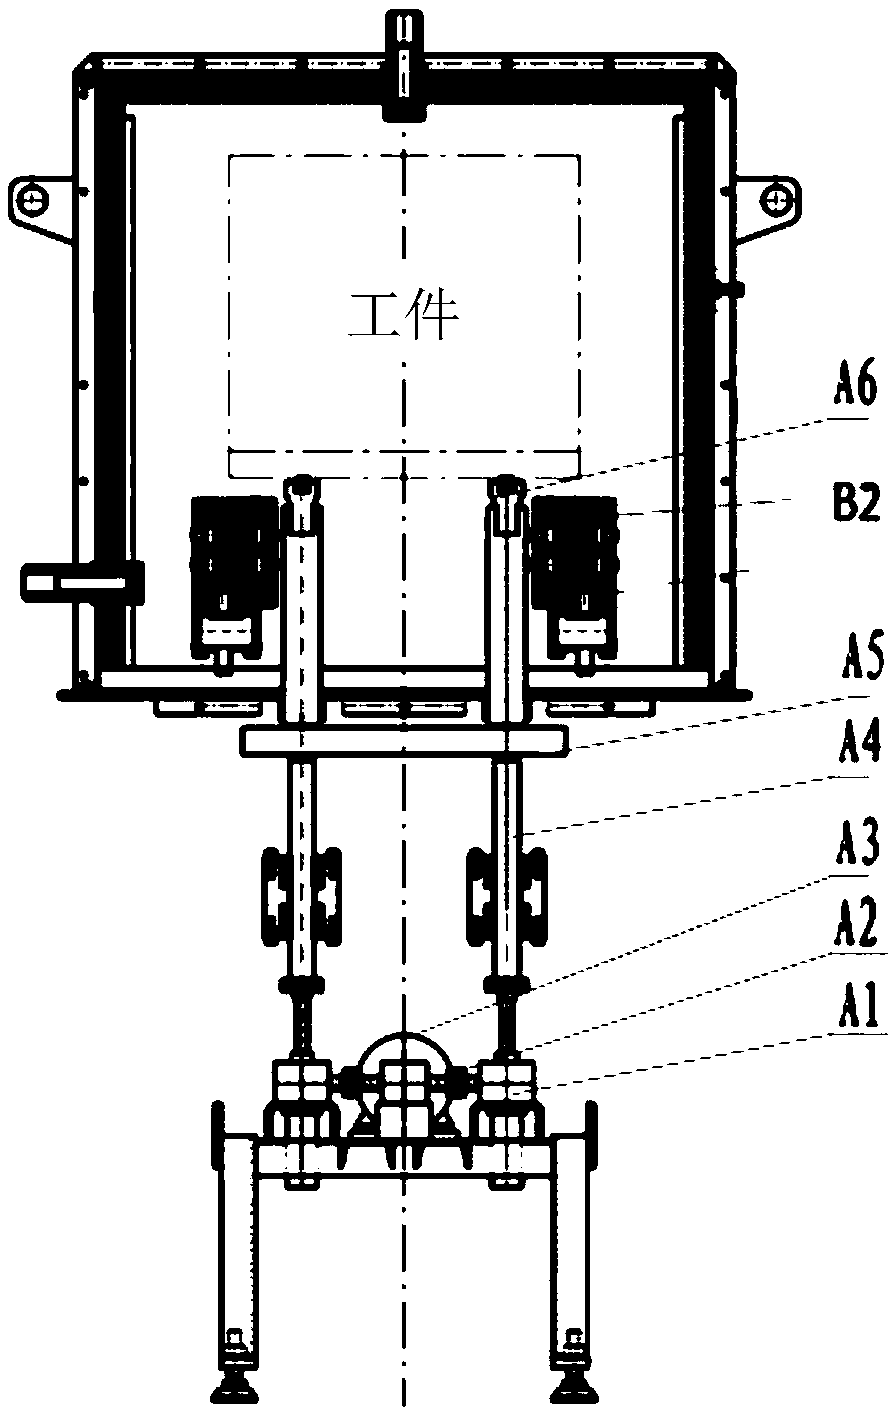 A feeding system of a double-chamber vacuum furnace for heat treatment